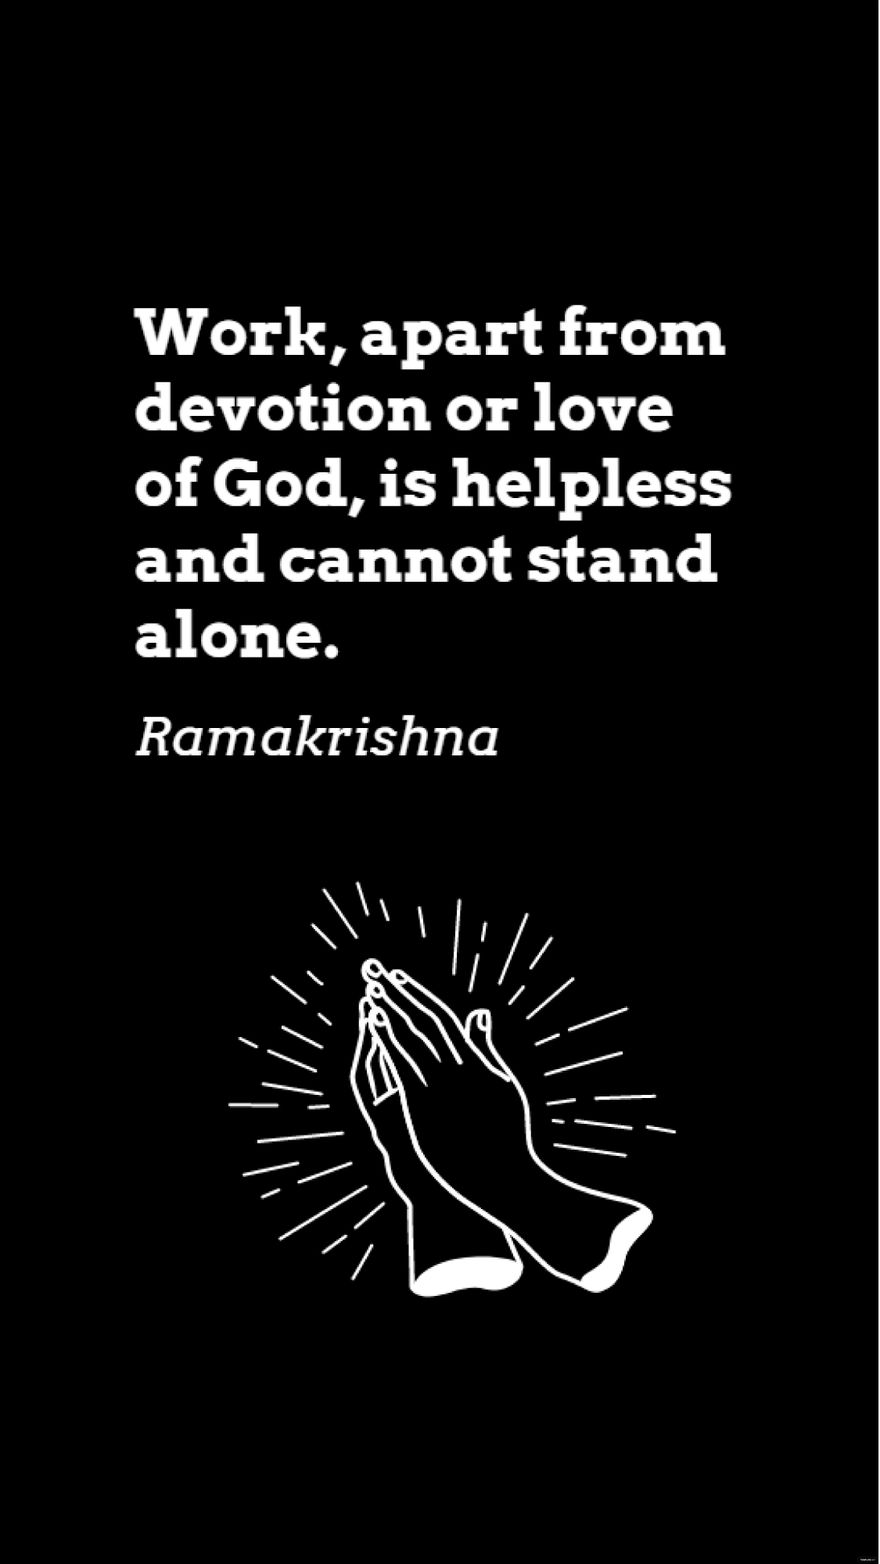 Ramakrishna - Work, apart from devotion or love of God, is helpless and cannot stand alone. in JPG